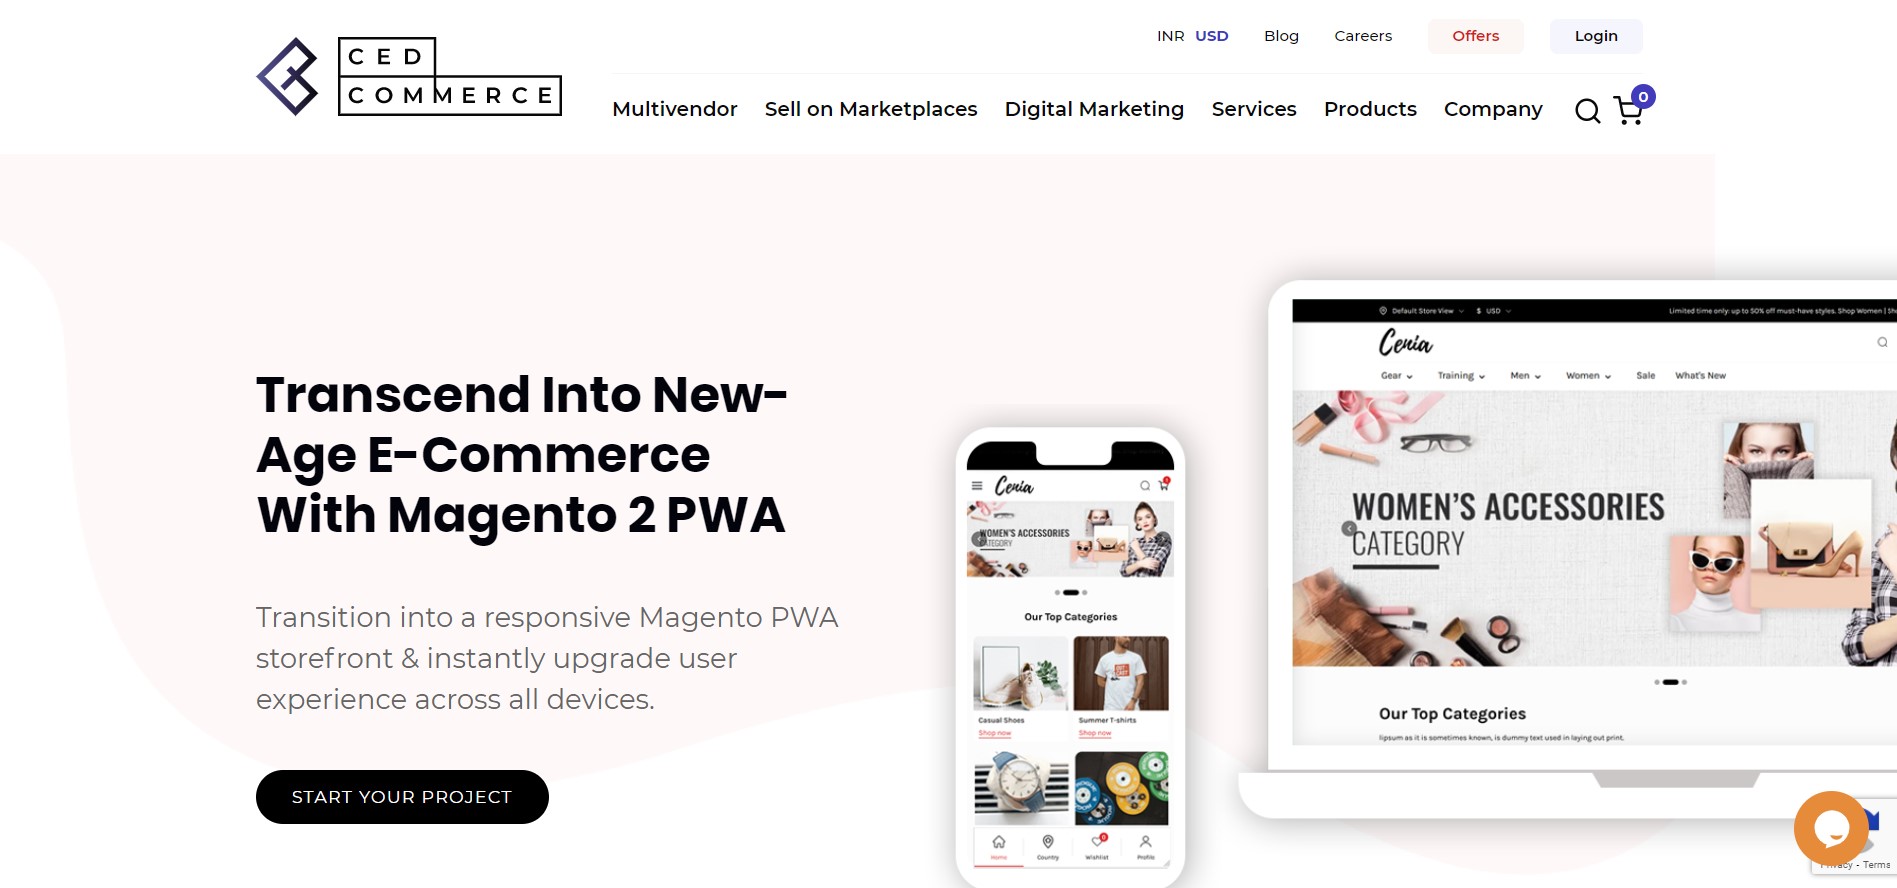 PWA solutions for Magento: CEDCOMMERCE